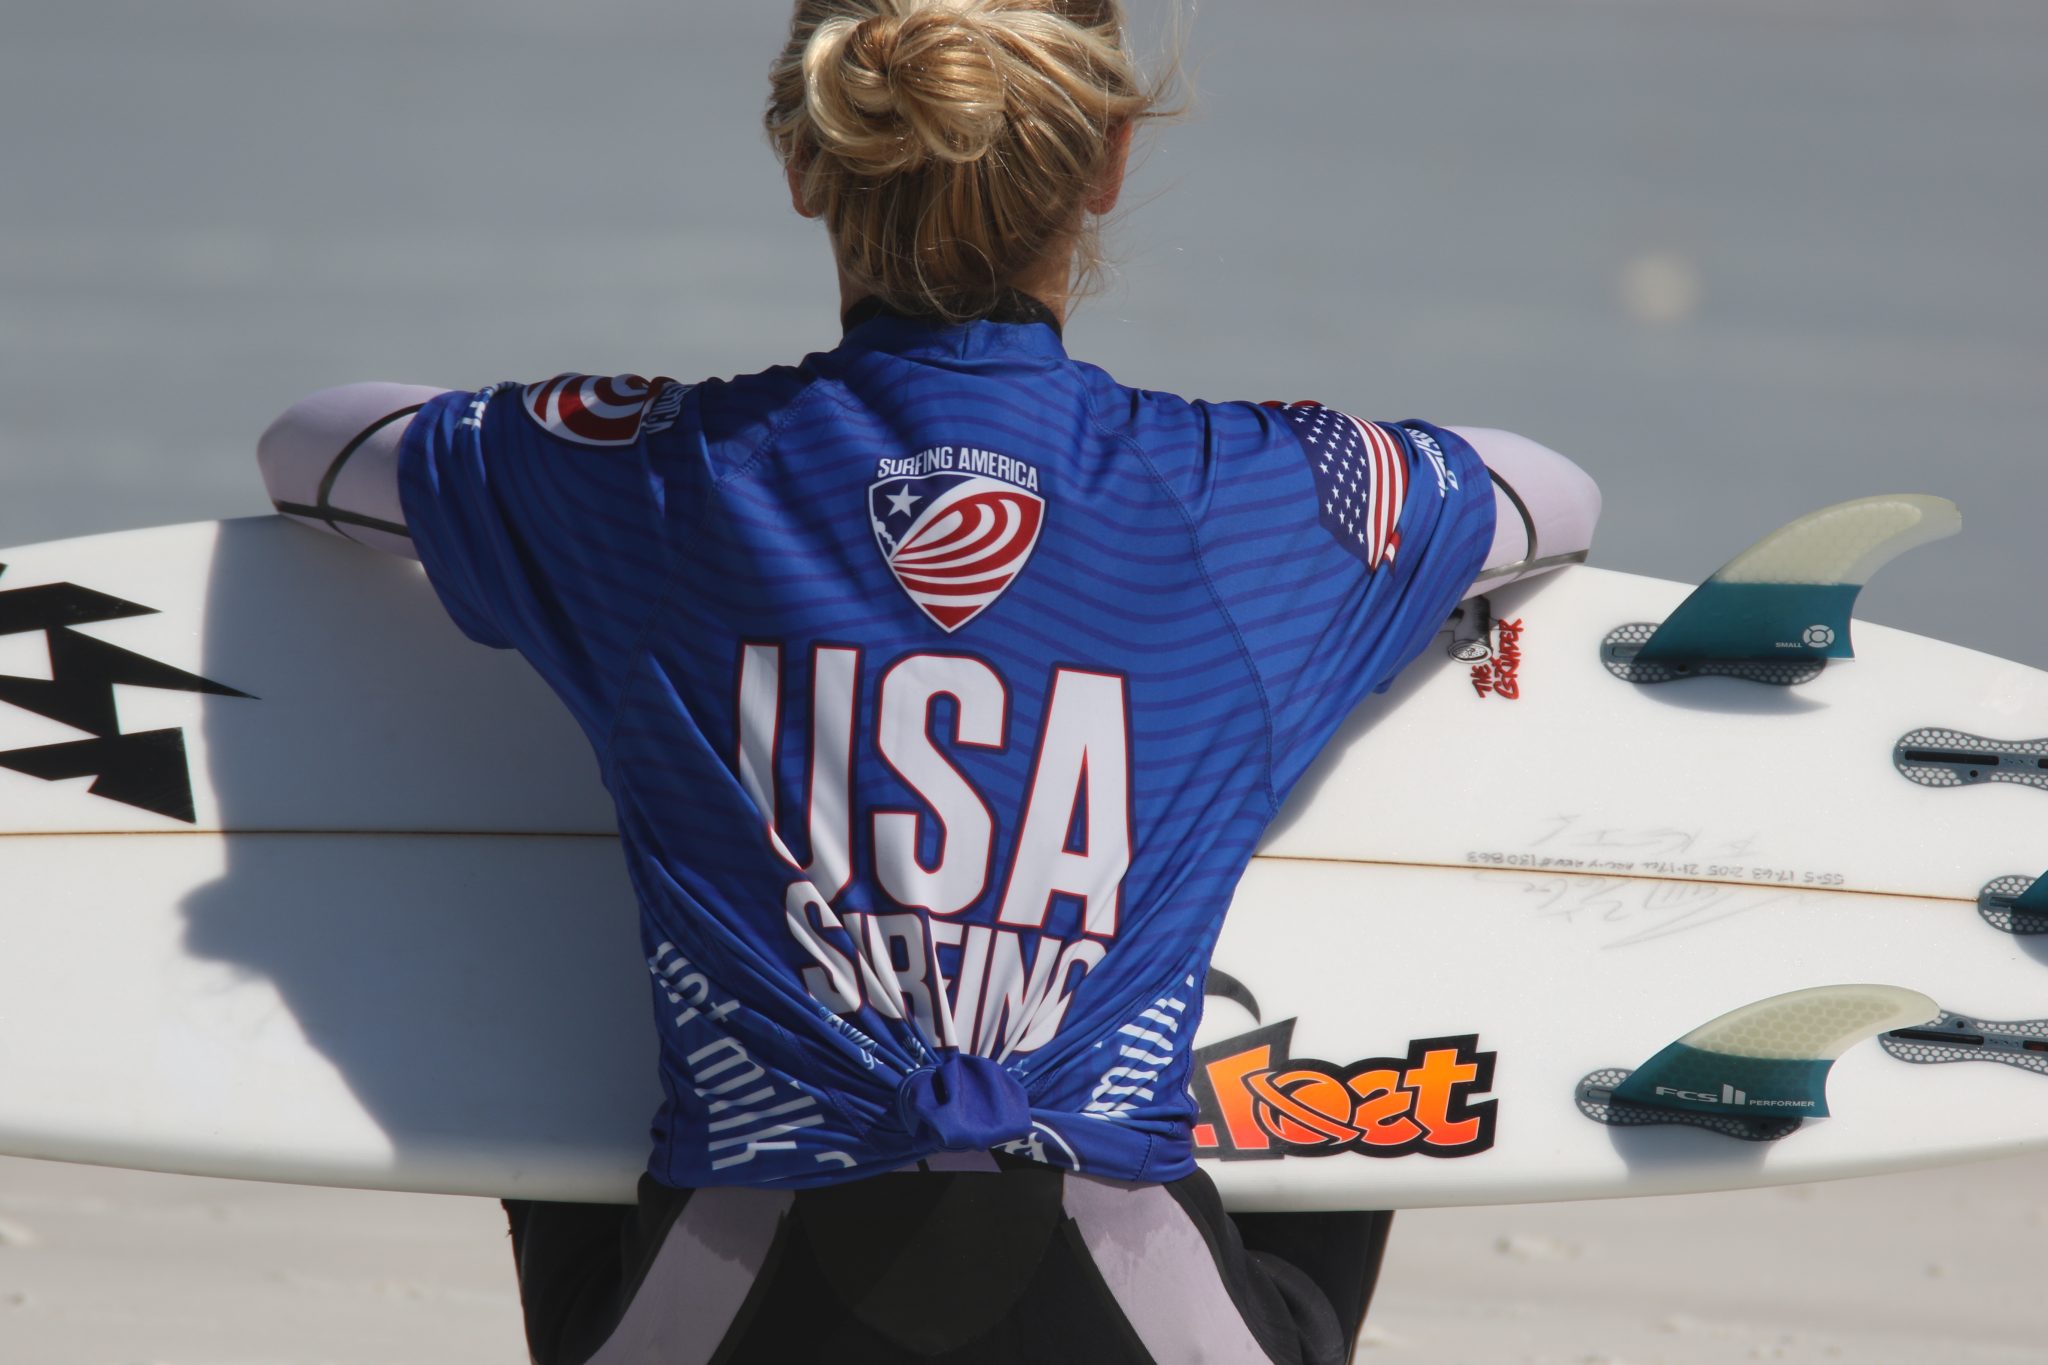 The fourth and final event of the <a href="http://www.surfingamerica.org/" target="_blank">Surfing America</a> Prime East 2016/2017 series kicked off in New Smyrna Beach, Florida, on March 4th-5th, with some of the East Coast’s best under-18 talent gathering to challenge choppy, windy conditions at New Smyrna Inlet. Big winners when it was all said and done were Bo Raynor (Boys U18), Blake Speir (Boys U16), Ryan Huckabee (Boys U14), Storm Portman (Girls U18), and Rachel Presti (Girls U16). With the <a href="http://www.surfingamerica.org/events/" target="_blank">final standings</a> for the year cemented, everyone knows who will be representing at Surfing America’s USA Champs at Lower Trestles this summer. So give yourself a hand, guys and girls (and parents too!) — you earned it.

[caption id="attachment_7703" align="alignnone" width="960"]<img class="size-large wp-image-7703" src="https://www.easternsurf.com/wp-content/uploads/2017/03/AK7A1204-1024x683.jpg" alt="" width="960" height="640" /> <em>The road well traveled in New Smyrna Beach, FL, for last weekend’s Surfing America Prime East 2016/2017 Event #4, which closed out the season for the East Coast’s best U18 surfers. Photo: Dugan</em>[/caption]

<strong>FINAL RESULTS:</strong>

<strong>BOYS U18</strong>

1. Bo Raynor, 2. Chase Modelski, 3. Blake Speir, 4. Luke Gordon

[caption id="attachment_7697" align="alignnone" width="960"]<img class="size-large wp-image-7697" src="https://www.easternsurf.com/wp-content/uploads/2017/03/AK7A0655-1024x683.jpg" alt="" width="960" height="640" /> <em>South Carolina’s Luke Gordon finished 4th in Boys U18. Photo: Dugan</em>[/caption]

[caption id="attachment_7699" align="alignnone" width="960"]<img class="size-large wp-image-7699" src="https://www.easternsurf.com/wp-content/uploads/2017/03/AK7A0961-1024x683.jpg" alt="" width="960" height="640" /> <em>Big hack, big win: North Carolina’s Bo Raynor claims the marquee division with a 1st-place finish in Boys U18. Photo: Dugan</em>[/caption]

<strong>GIRLS U18</strong>

1. Storm Portman, 2. Nicole Fulford, 3. Eden Lange, 4. Rachel Presti

[caption id="attachment_7704" align="alignnone" width="960"]<img class="size-large wp-image-7704" src="https://www.easternsurf.com/wp-content/uploads/2017/03/AK7A1210-1024x683.jpg" alt="" width="960" height="640" /> <em>Girls U18 winner Storm Portman hanging with the South Carolina crew. Photo: Dugan</em>[/caption]

<strong>BOYS U16</strong>

1. Blake Speir, 2. Laird Myers, 3. Kyle Tester, 4. Kyle Caracciolo

[caption id="attachment_7713" align="alignnone" width="960"]<img class="size-large wp-image-7713" src="https://www.easternsurf.com/wp-content/uploads/2017/03/AK7A1661-1024x683.jpg" alt="" width="960" height="640" /> <em>Kyle Tester claimed the best result of any New Jersey resident, finishing 3rd in Boys U16. Photo: Dugan</em>[/caption]

[caption id="attachment_7696" align="alignnone" width="960"]<img class="size-large wp-image-7696" src="https://www.easternsurf.com/wp-content/uploads/2017/03/AK7A0641-1024x683.jpg" alt="" width="960" height="640" /> <em>Virginia Beach’s Laird Myers earned a runner-up finish in Boys U16. Photo: Dugan</em>[/caption]

[caption id="attachment_7711" align="alignnone" width="960"]<img class="size-large wp-image-7711" src="https://www.easternsurf.com/wp-content/uploads/2017/03/AK7A1640-1-1024x683.jpg" alt="" width="960" height="640" /> <em>But it was Blake Speir with one of the biggest double finishes of the contest: 1st in Boys U16, 3rd in Boys U18, and the Hottest Wave Award for this very ride. Photo: Dugan</em>[/caption]

<strong>GIRLS U16</strong>

1. Rachel Presti, 2. Eden Lange, 3. Leah Thompson, 4. Hannah Blevins

[caption id="attachment_7707" align="alignnone" width="960"]<img class="size-large wp-image-7707" src="https://www.easternsurf.com/wp-content/uploads/2017/03/AK7A1291-1024x683.jpg" alt="" width="960" height="640" /> <em>North Florida’s Hannah Blevins rounded out the Girls U16 final with a 4th-place finish. Photo: Dugan</em>[/caption]

[caption id="attachment_7715" align="alignnone" width="960"]<img class="size-large wp-image-7715" src="https://www.easternsurf.com/wp-content/uploads/2017/03/AK7A1801-1024x683.jpg" alt="" width="960" height="640" /> <em>Central Florida’s Rachel Presti won Girls U16 with the highest wave score of the entire day, an 8.67. She also finished 4th in Girls U18. Photo: Dugan</em>[/caption]

<strong>BOYS U14</strong>

1. Ryan Huckabee, 2. Robbie Goodwin, 3. Sterling Makish, 4. CJ Mangio<strong> </strong>

[caption id="attachment_7716" align="alignnone" width="960"]<img class="size-large wp-image-7716" src="https://www.easternsurf.com/wp-content/uploads/2017/03/AK7A1958-1024x683.jpg" alt="" width="960" height="640" /> <em>Massapequa, NY’s, CJ Mangio carved to a 4th-place finish in Boys U14, leaving a mark on fellow New York native and ESM Co-Owner/Publisher Tom Dugan: “CJ impressed me most out of all the kids with his insane cutback style,” Dugan said.</em>[/caption]

[caption id="attachment_7717" align="alignnone" width="960"]<img class="size-large wp-image-7717" src="https://www.easternsurf.com/wp-content/uploads/2017/03/AK7A2038-1024x683.jpg" alt="Surfing America Prime " width="960" height="640" /> <em>North Florida’s Ryan Huckabee won Boys U14, cruising to a 1st-place finish in every heat he contested throughout the day. Photo: Dugan</em>[/caption]

[caption id="attachment_7708" align="alignnone" width="960"]<img class="size-large wp-image-7708" src="https://www.easternsurf.com/wp-content/uploads/2017/03/AK7A1327-1024x683.jpg" alt="" width="960" height="640" /> <em>Is it 12 o’clock yet? South Florida’s Avery Aydelotte straight up in Girls U18. Photo: Dugan</em>[/caption]

[caption id="attachment_7714" align="alignnone" width="960"]<img class="size-large wp-image-7714" src="https://www.easternsurf.com/wp-content/uploads/2017/03/AK7A1737-1024x683.jpg" alt="" width="960" height="640" /> <em>Shea Lopez and Zoe Benedetto talk heat strategy and board design. Photo: Dugan</em>[/caption]

[caption id="attachment_7712" align="alignnone" width="960"]<img class="size-large wp-image-7712" src="https://www.easternsurf.com/wp-content/uploads/2017/03/AK7A1648-1024x683.jpg" alt="" width="960" height="640" /> <em>South Carolina’s Tyson Royston. Photo: Dugan</em>[/caption]

[caption id="attachment_7709" align="alignnone" width="960"]<img class="size-large wp-image-7709" src="https://www.easternsurf.com/wp-content/uploads/2017/03/AK7A1466-1024x683.jpg" alt="" width="960" height="640" /> <em>New York’s Owen O’Donnell. Photo: Dugan</em>[/caption]

[caption id="attachment_7706" align="alignnone" width="960"]<img class="size-large wp-image-7706" src="https://www.easternsurf.com/wp-content/uploads/2017/03/AK7A1220-1024x683.jpg" alt="" width="960" height="640" /> <em>The Central Florida crew, straight chilling. Photo: Dugan</em>[/caption]

[caption id="attachment_7710" align="alignnone" width="960"]<img class="size-large wp-image-7710" src="https://www.easternsurf.com/wp-content/uploads/2017/03/AK7A1597-1024x683.jpg" alt="" width="960" height="640" /> <em>New Jersey’s Logan Kamen. Photo: Dugan</em>[/caption]

[caption id="attachment_7702" align="alignnone" width="960"]<img class="wp-image-7702 size-large" src="https://www.easternsurf.com/wp-content/uploads/2017/03/AK7A1182-1024x683.jpg" alt="surfing america prime east" width="960" height="640" /> <em>North Florida’s Molly Kirk. Photo: Dugan</em>[/caption]

[caption id="attachment_7698" align="alignnone" width="960"]<img class="size-large wp-image-7698" src="https://www.easternsurf.com/wp-content/uploads/2017/03/AK7A0857-1024x683.jpg" alt="" width="960" height="640" /> <em>“What’s for lunch?” Real talk in between heats. Photo: Dugan</em>[/caption]

[caption id="attachment_7701" align="alignnone" width="960"]<img class="size-large wp-image-7701" src="https://www.easternsurf.com/wp-content/uploads/2017/03/AK7A1155-1024x683.jpg" alt="" width="960" height="640" /> <em>North Florida’s Braidyn Cunningham. Photo: Dugan</em>[/caption]

[caption id="attachment_7700" align="alignnone" width="960"]<img class="size-large wp-image-7700" src="https://www.easternsurf.com/wp-content/uploads/2017/03/AK7A1093-1024x683.jpg" alt="" width="960" height="640" /> <em>Madeline Zeuli, representing for the red, white, and blue. Photo: Dugan</em>[/caption]

[caption id="attachment_7705" align="alignnone" width="960"]<img class="size-large wp-image-7705" src="https://www.easternsurf.com/wp-content/uploads/2017/03/AK7A1218-1024x683.jpg" alt="" width="960" height="640" /> <em>Parents, take a bow — you deserve it too. Photo: Dugan</em>[/caption]

[template id=”1199″]